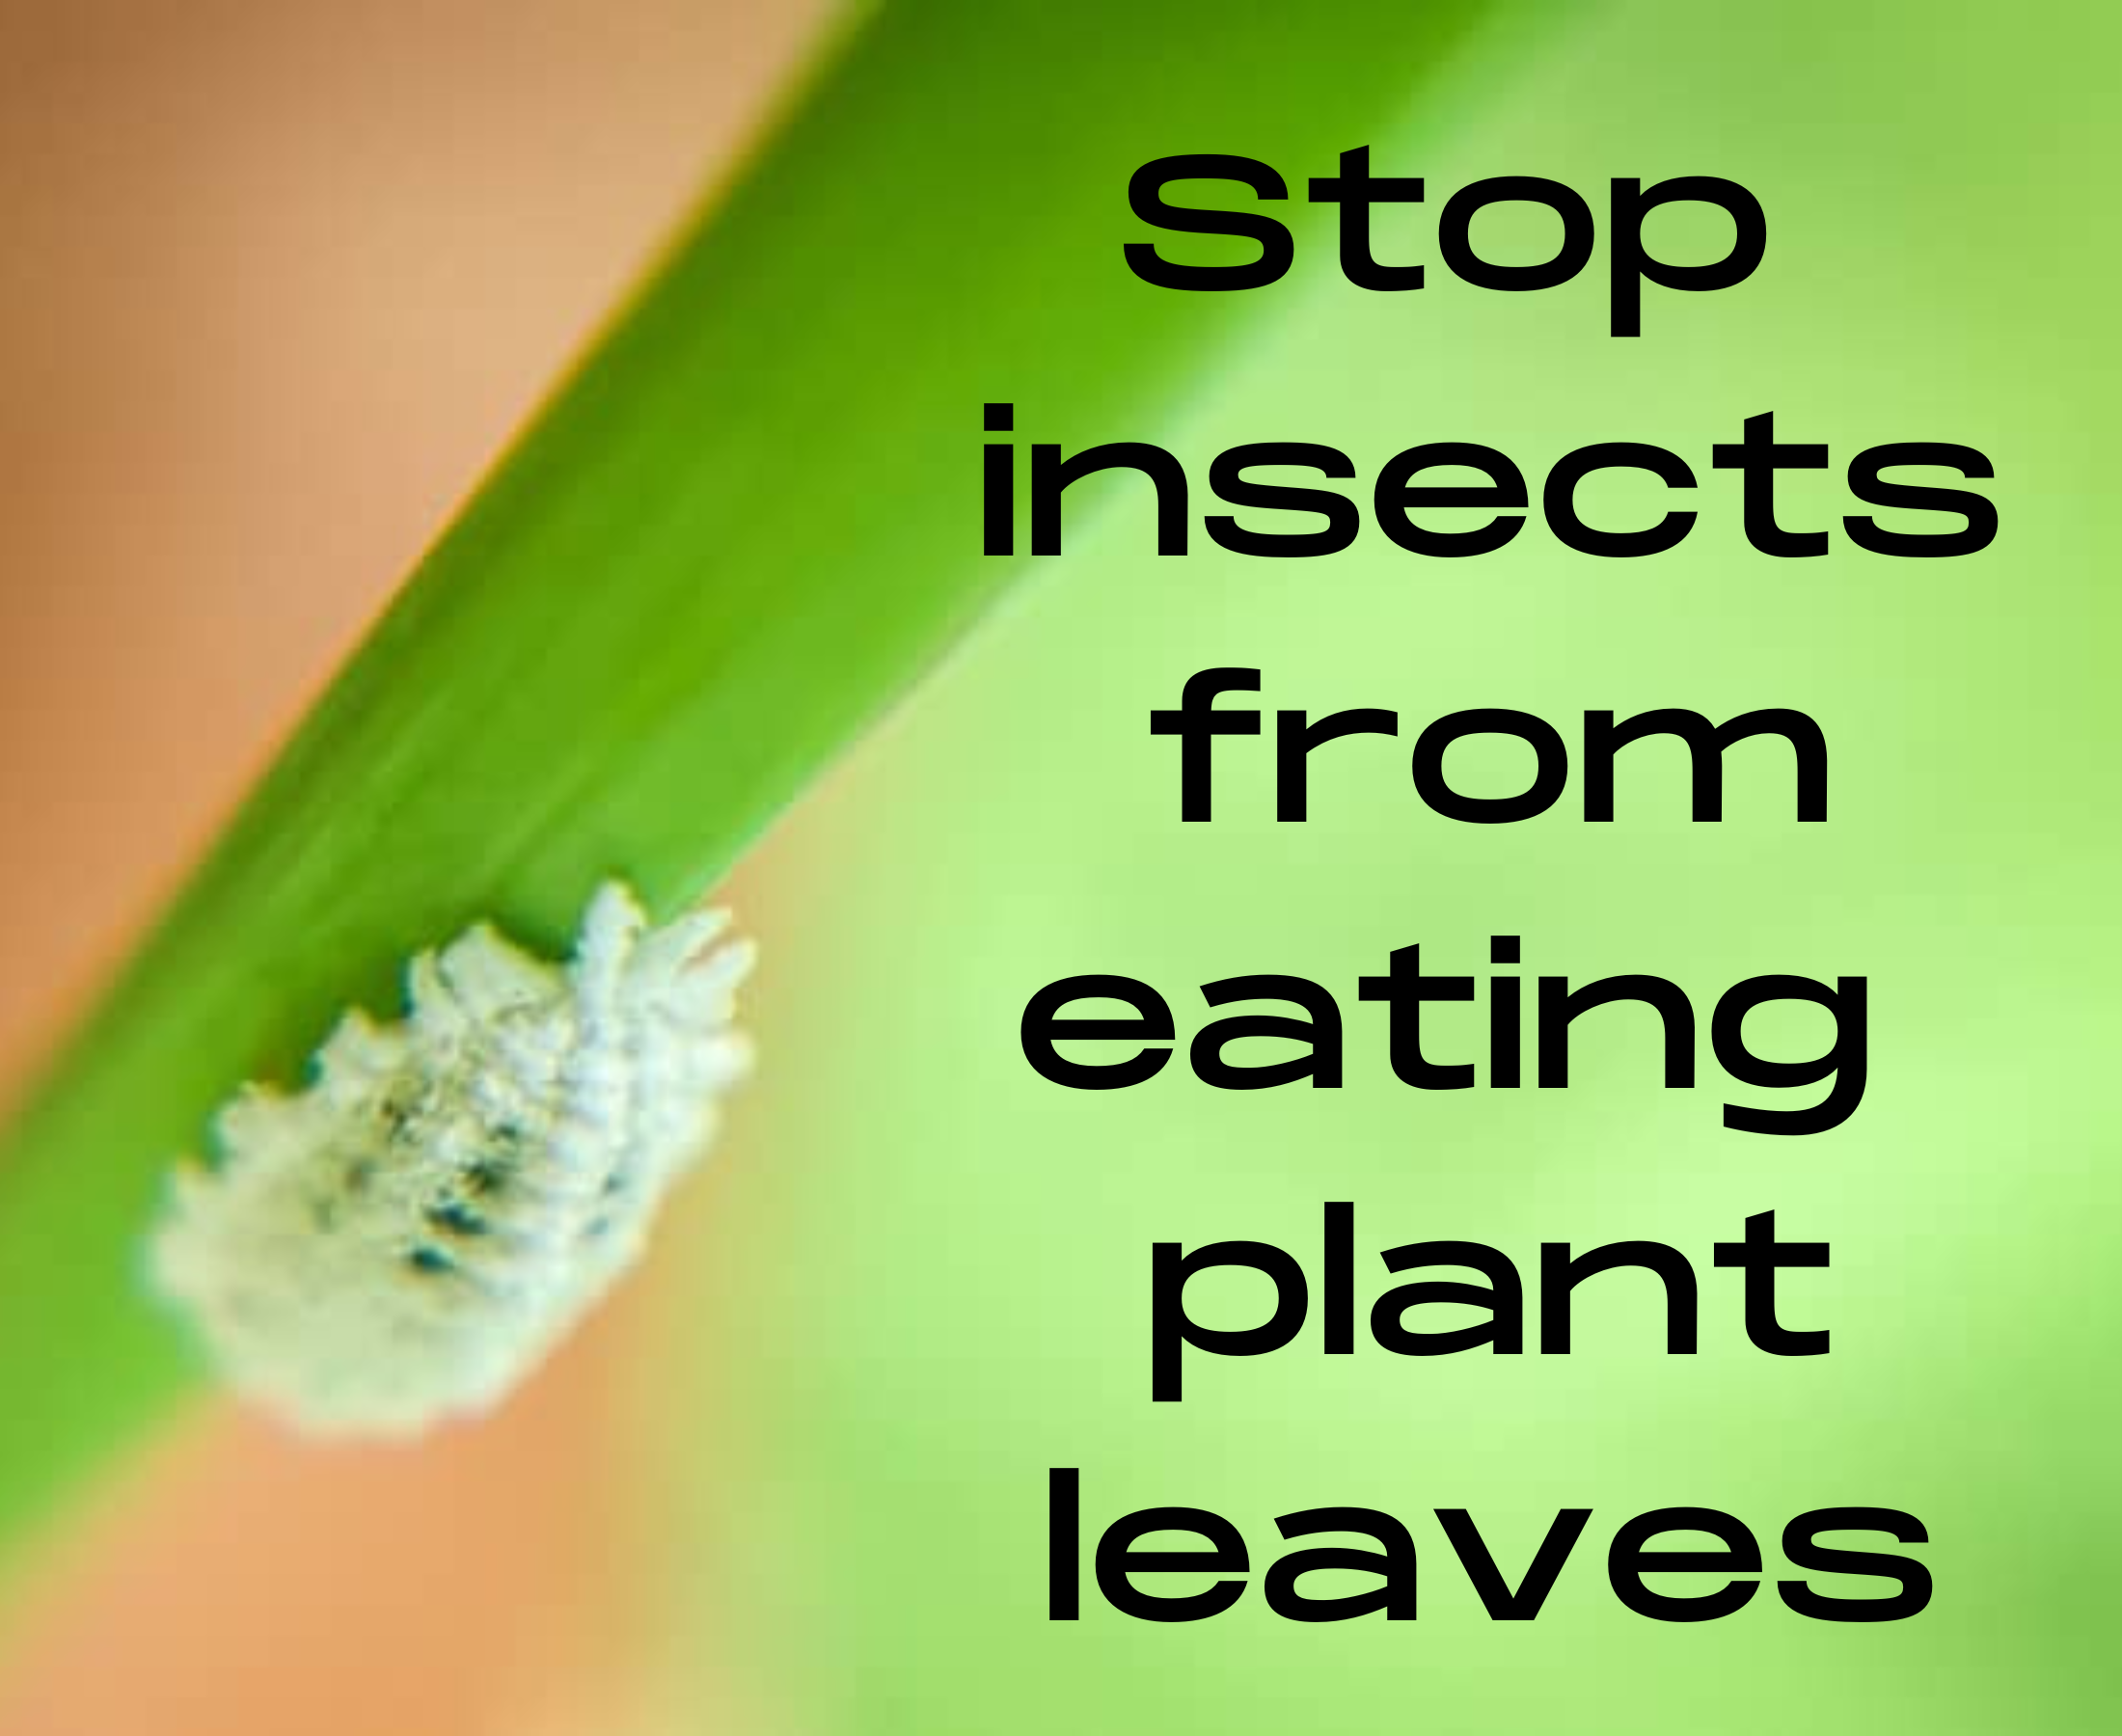 How to stop insects from eating plants naturally?